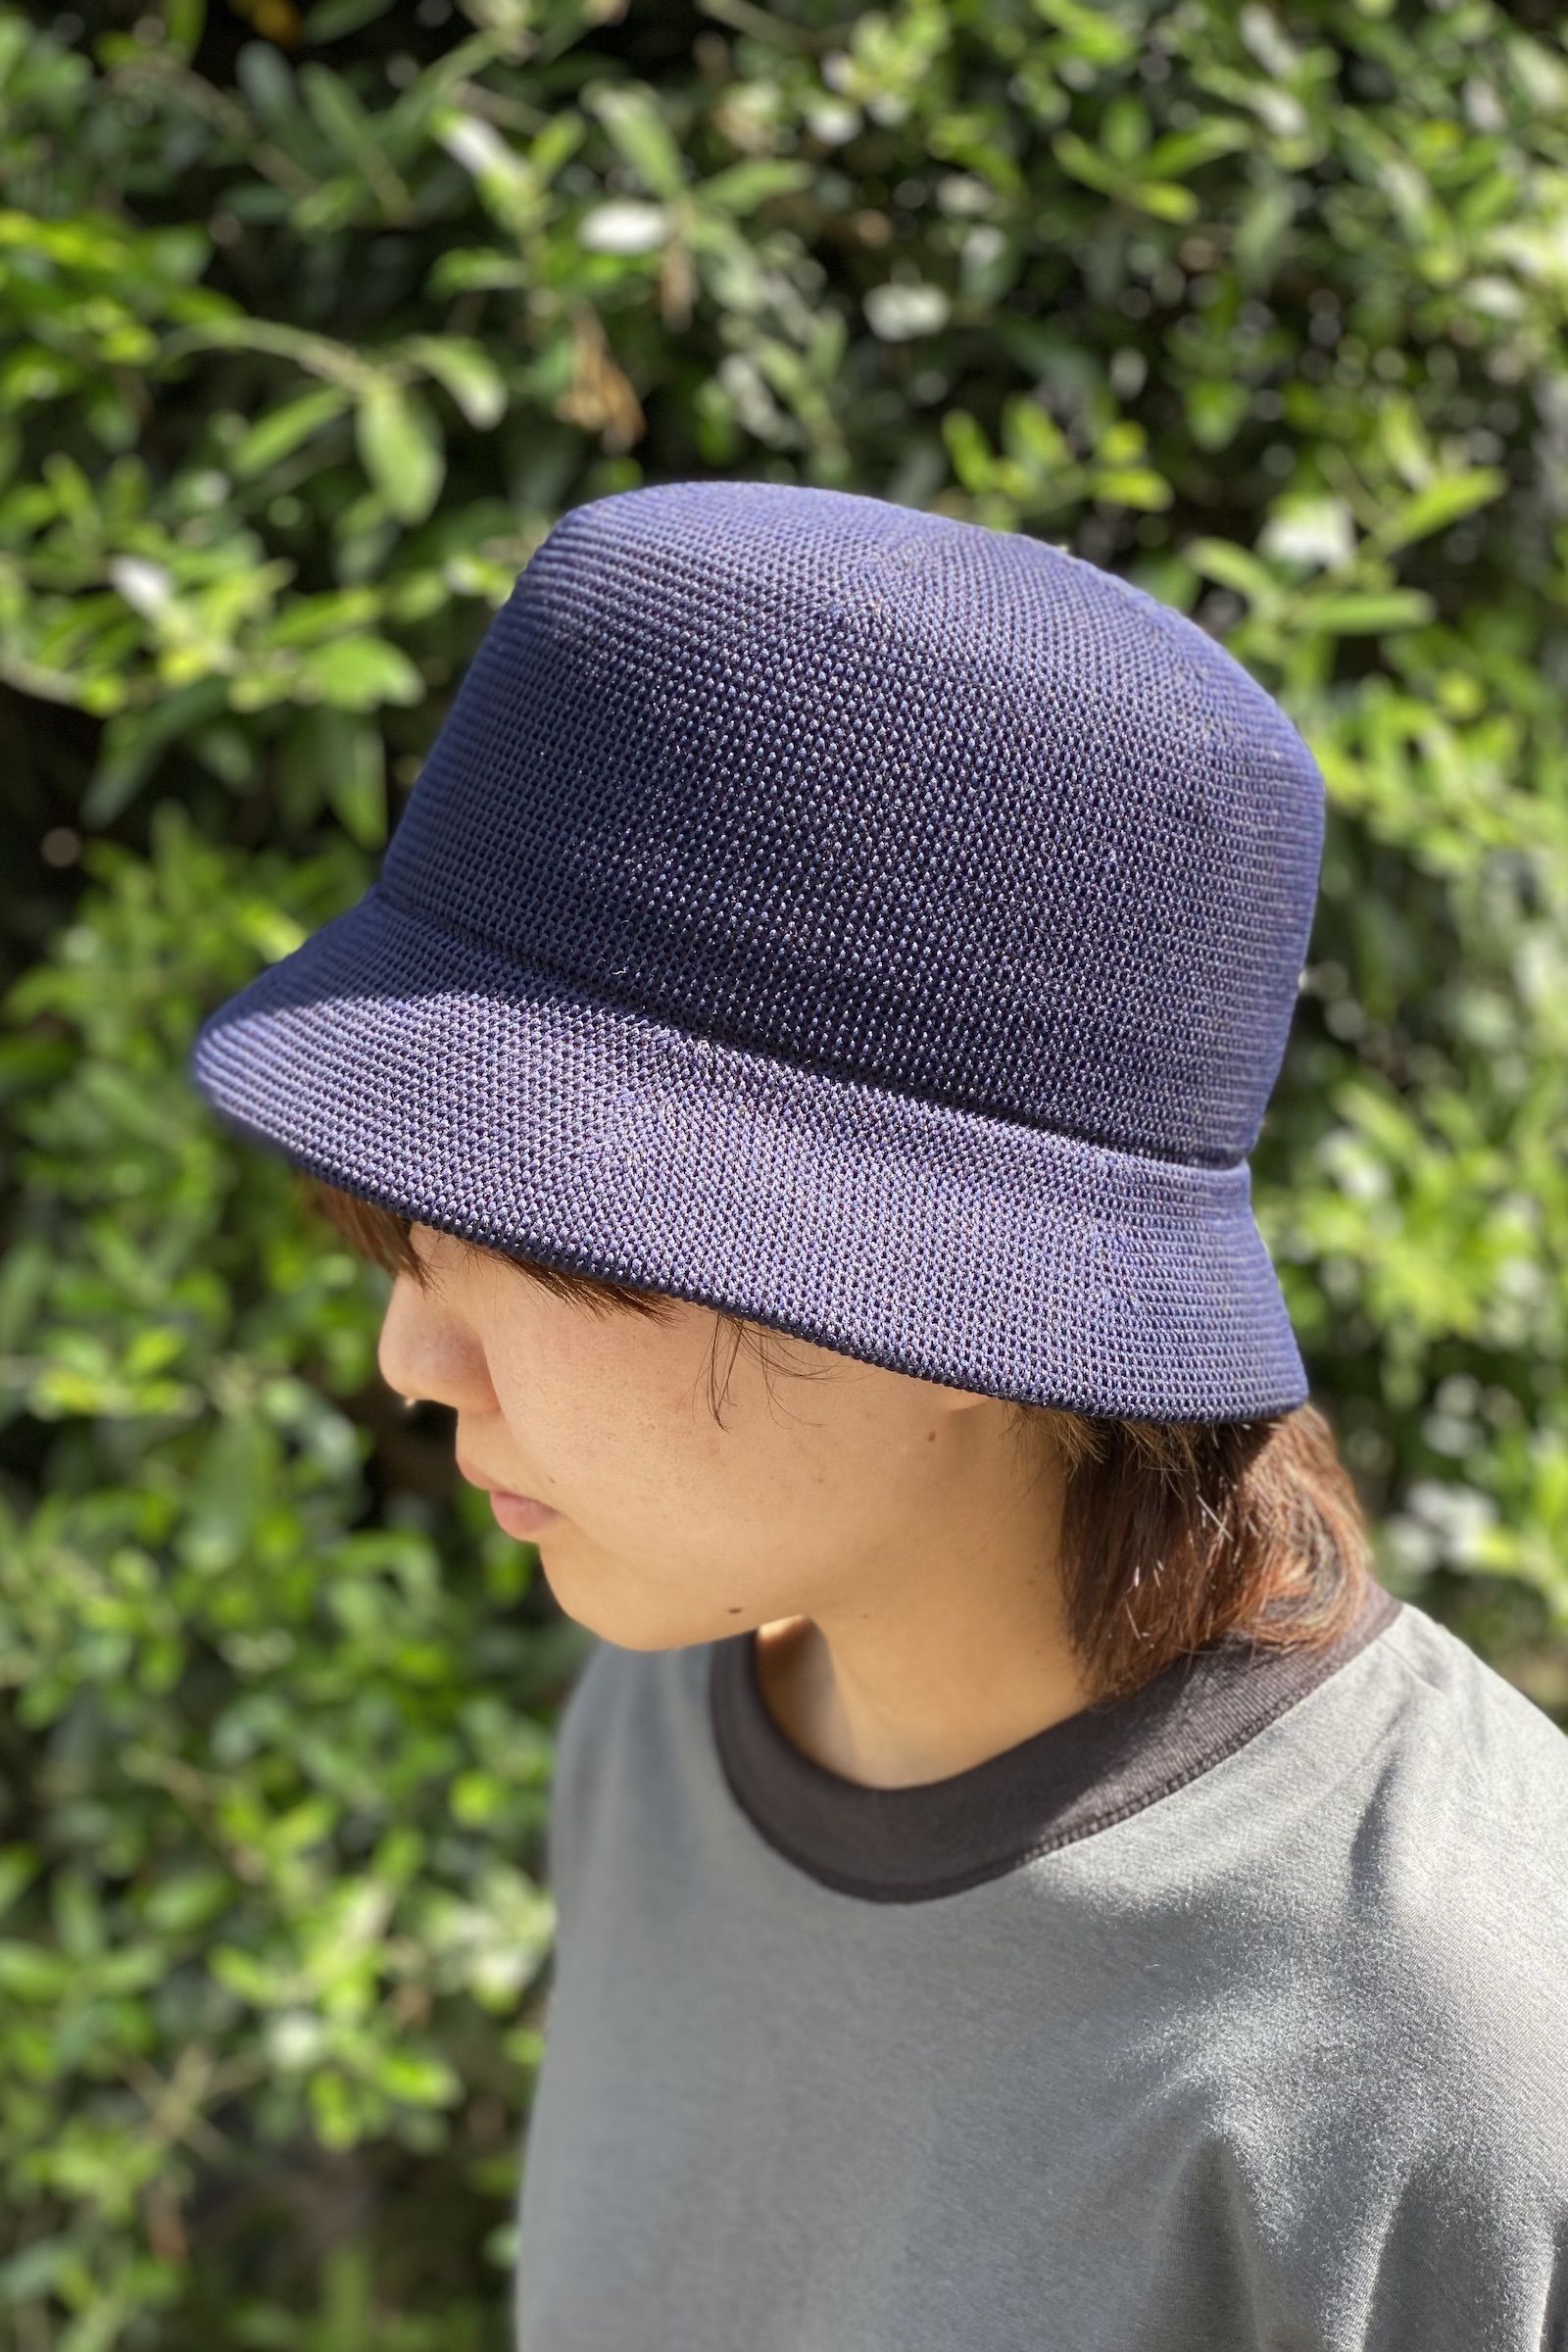 CFCL - mesh knit hat 1 -navy- 22aw unisex | asterisk